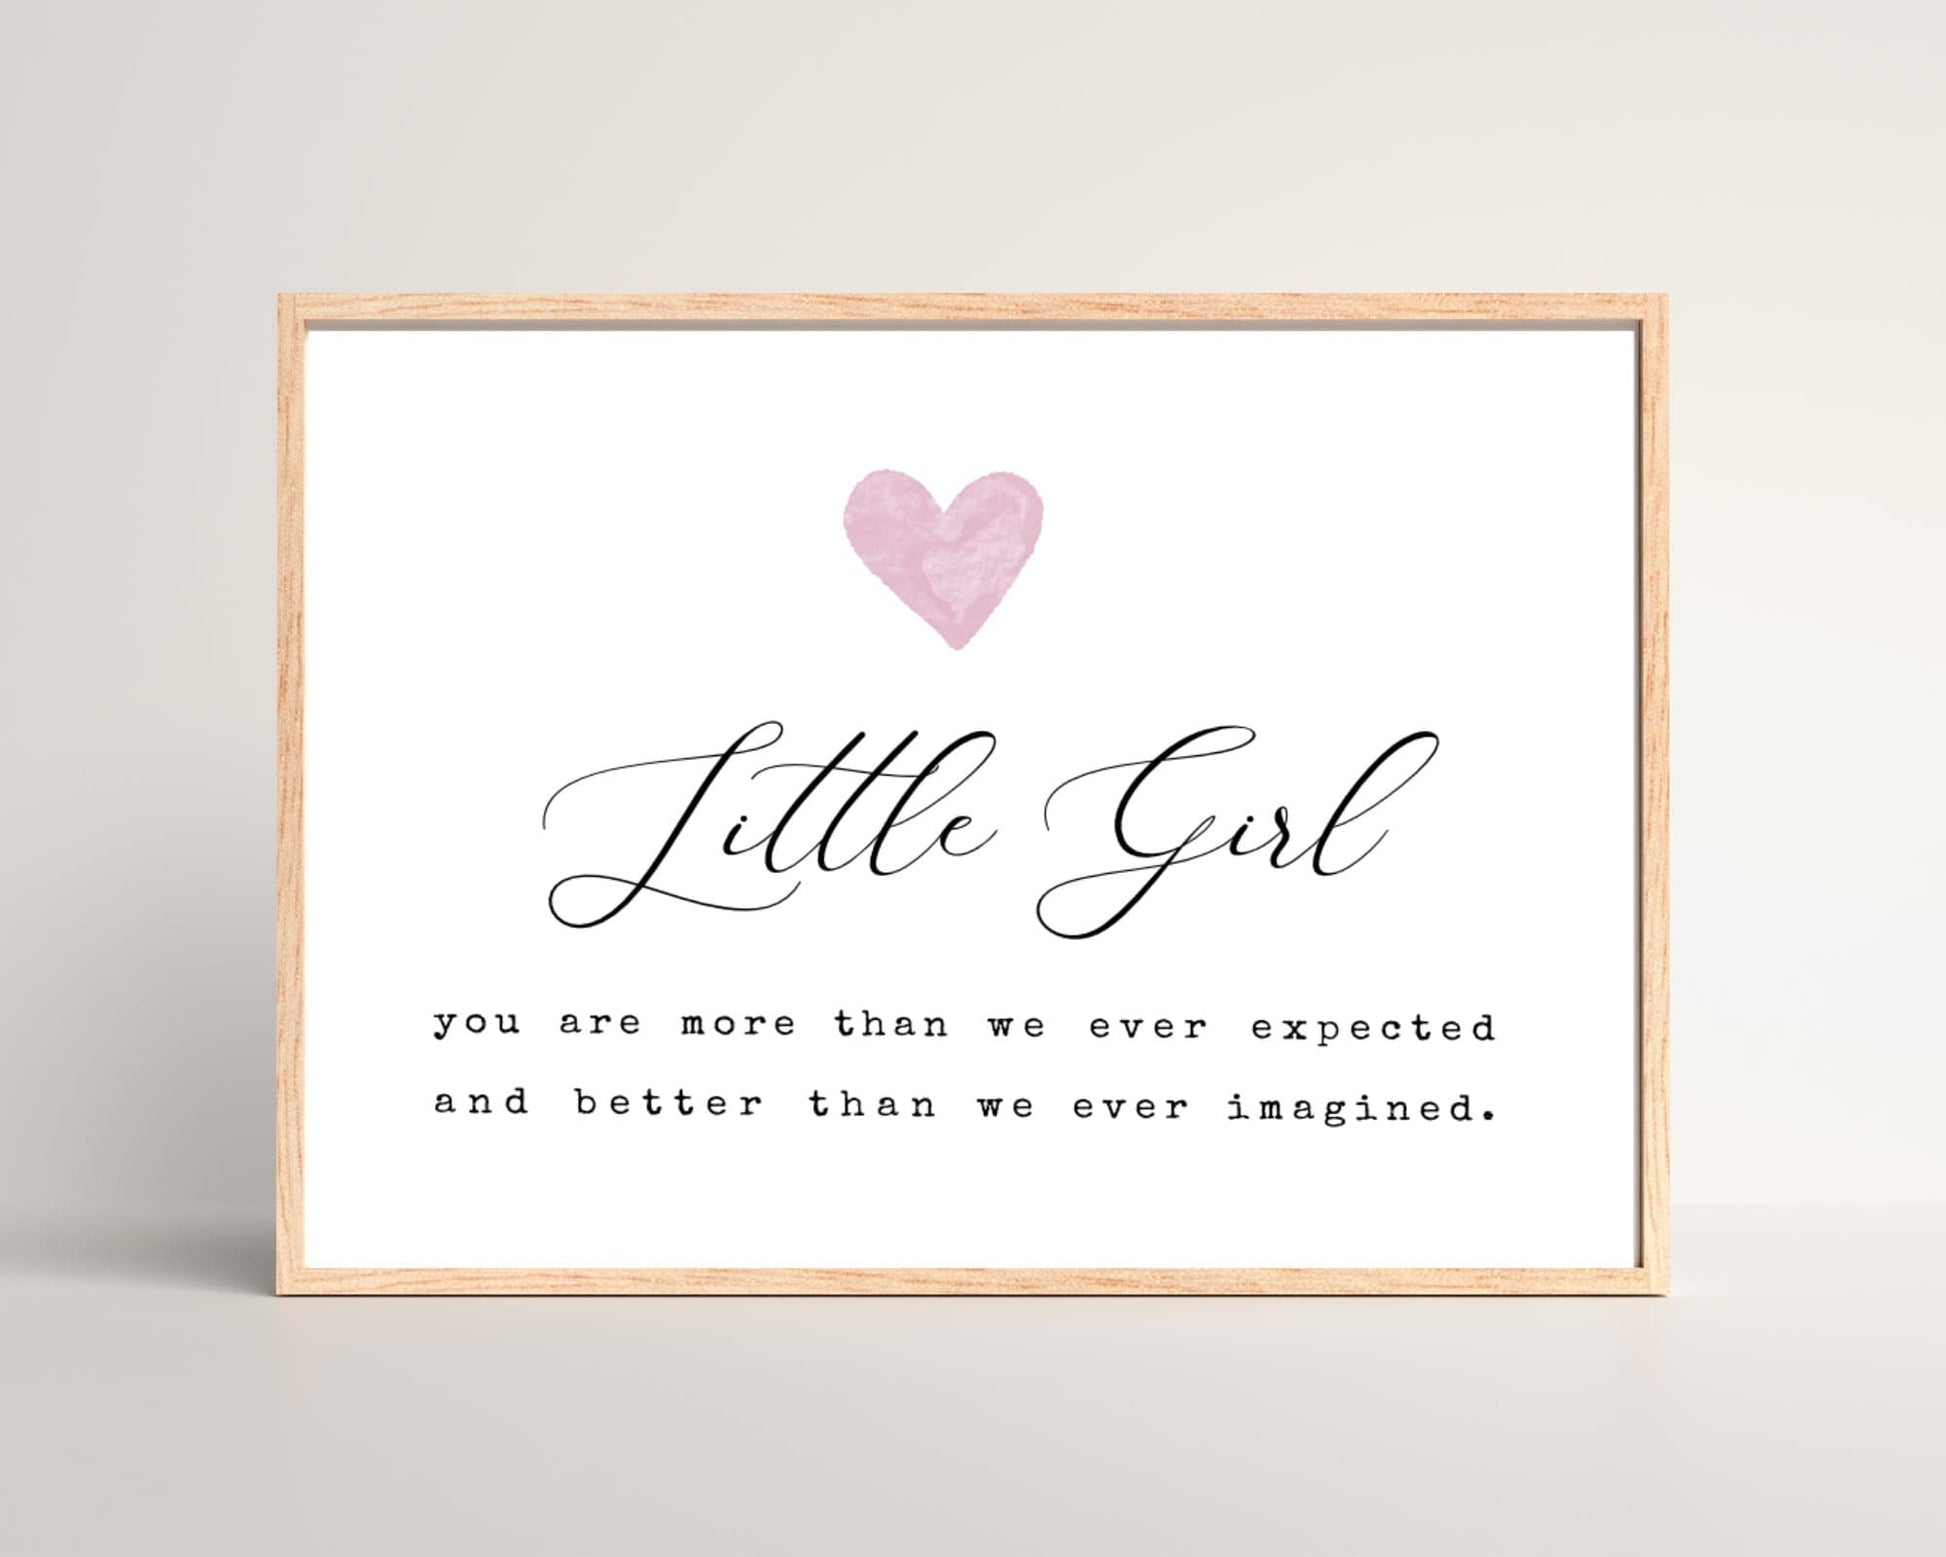 A little girl’s room horizontal digital print that has a pink heart at the top, and a piece of writing that says: “Little girl, you are more than we ever expected and better than we ever imagined.”